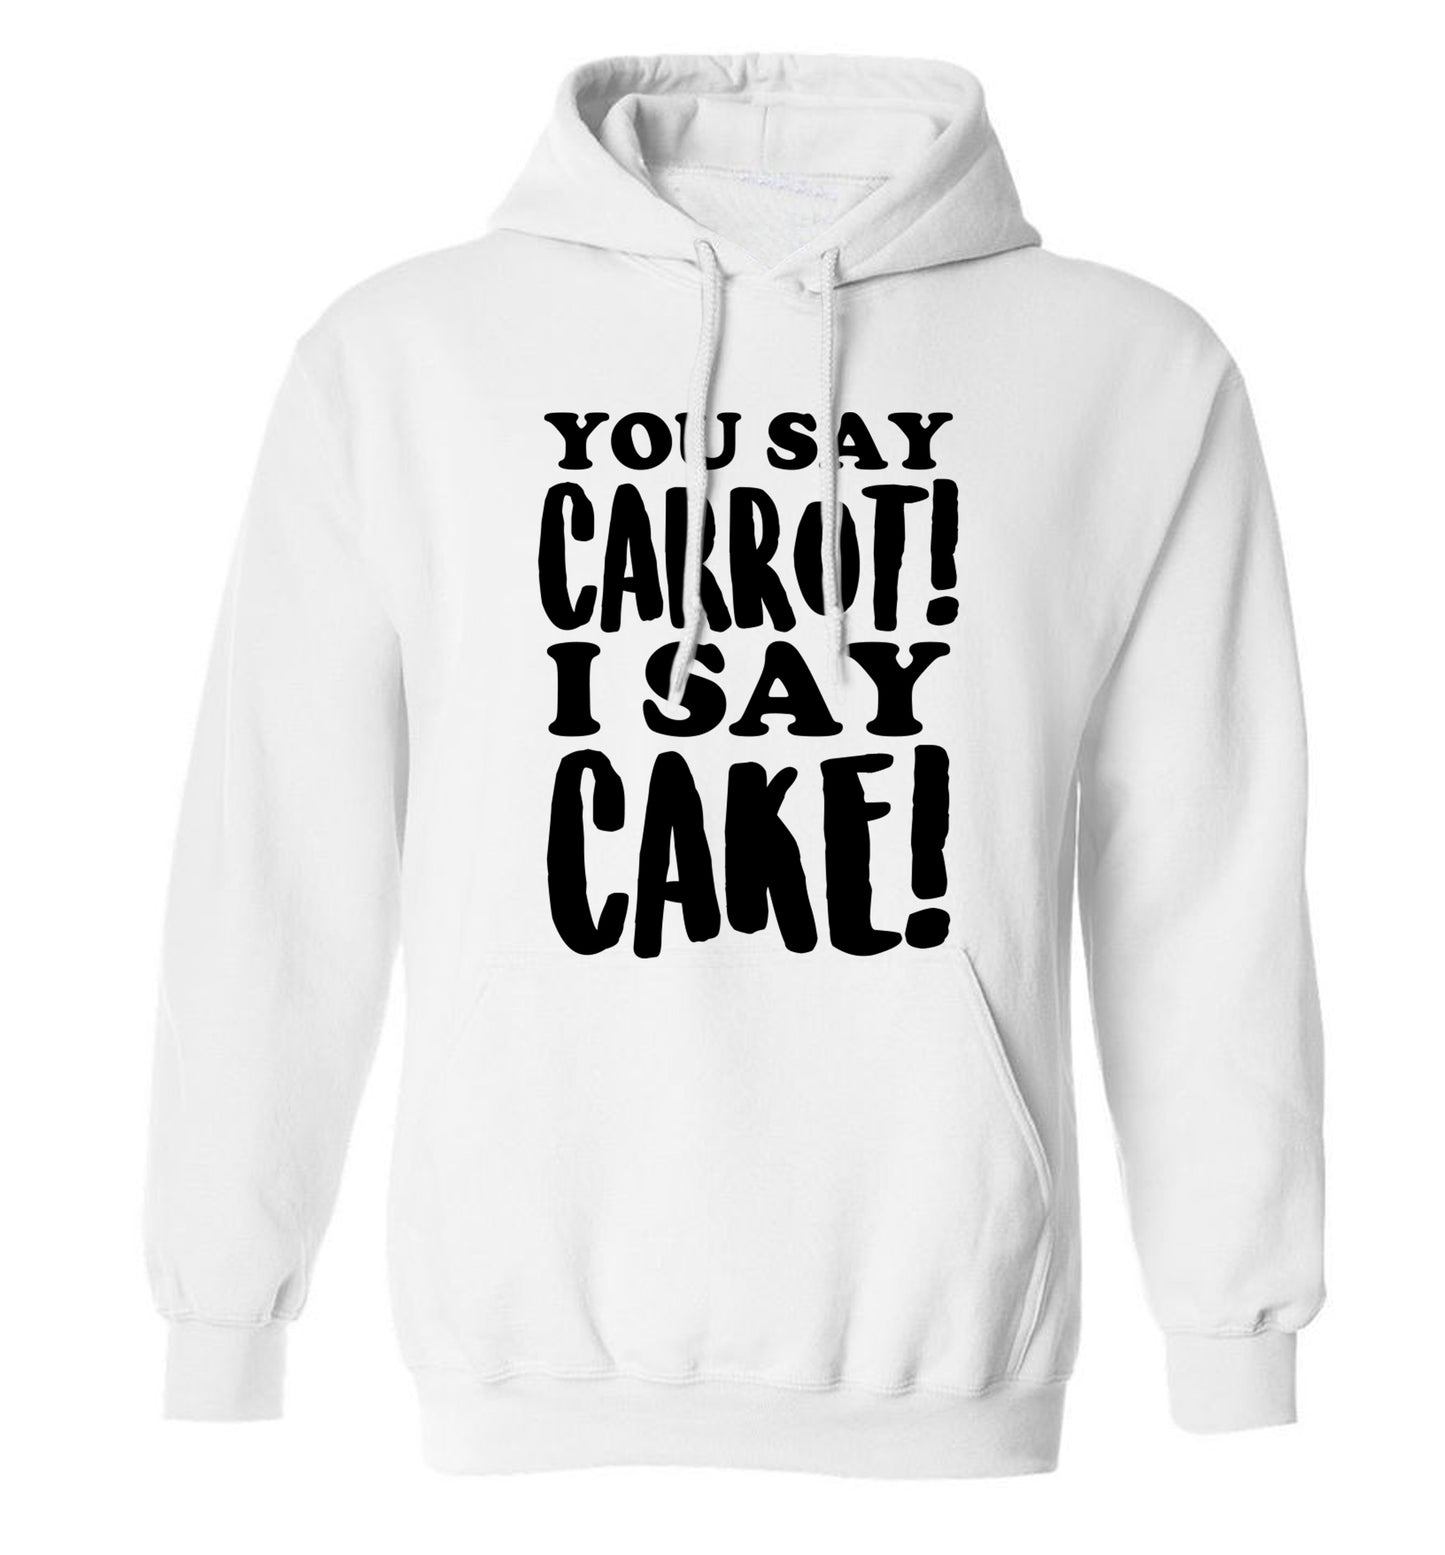 You say carrot I say cake! adults unisex white hoodie 2XL